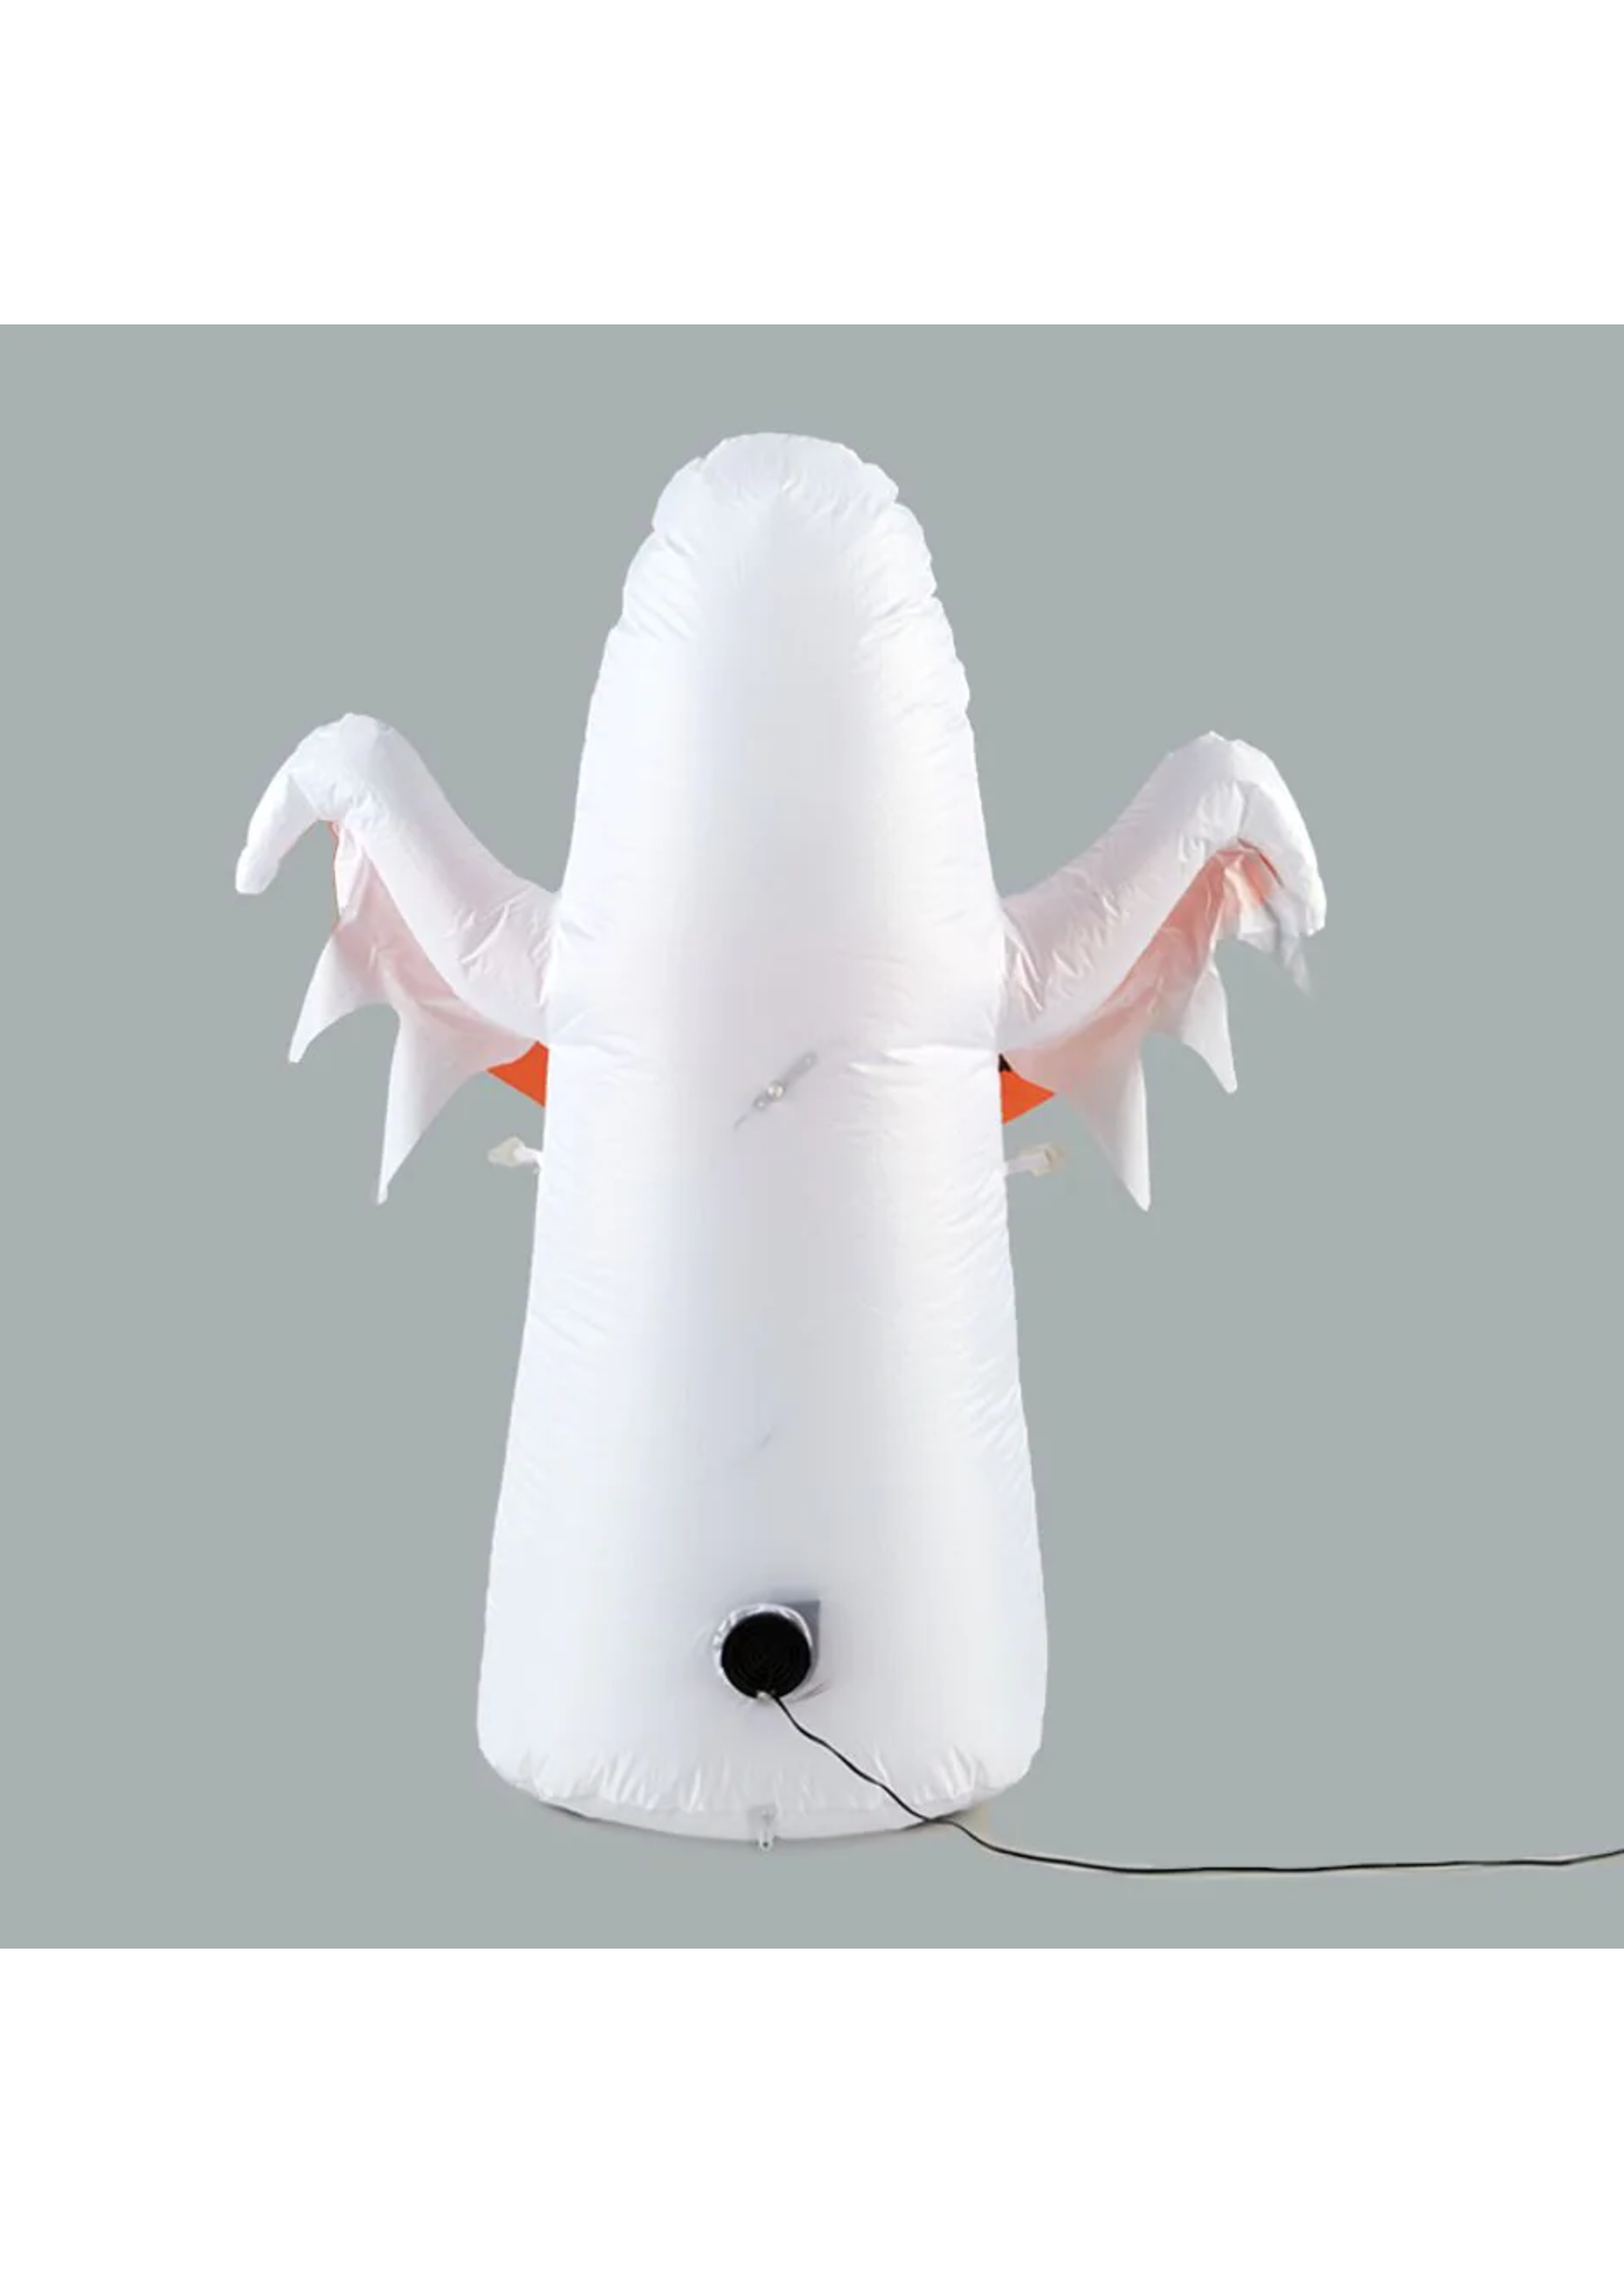 LTD Commodities Inflatable Boo Ghost